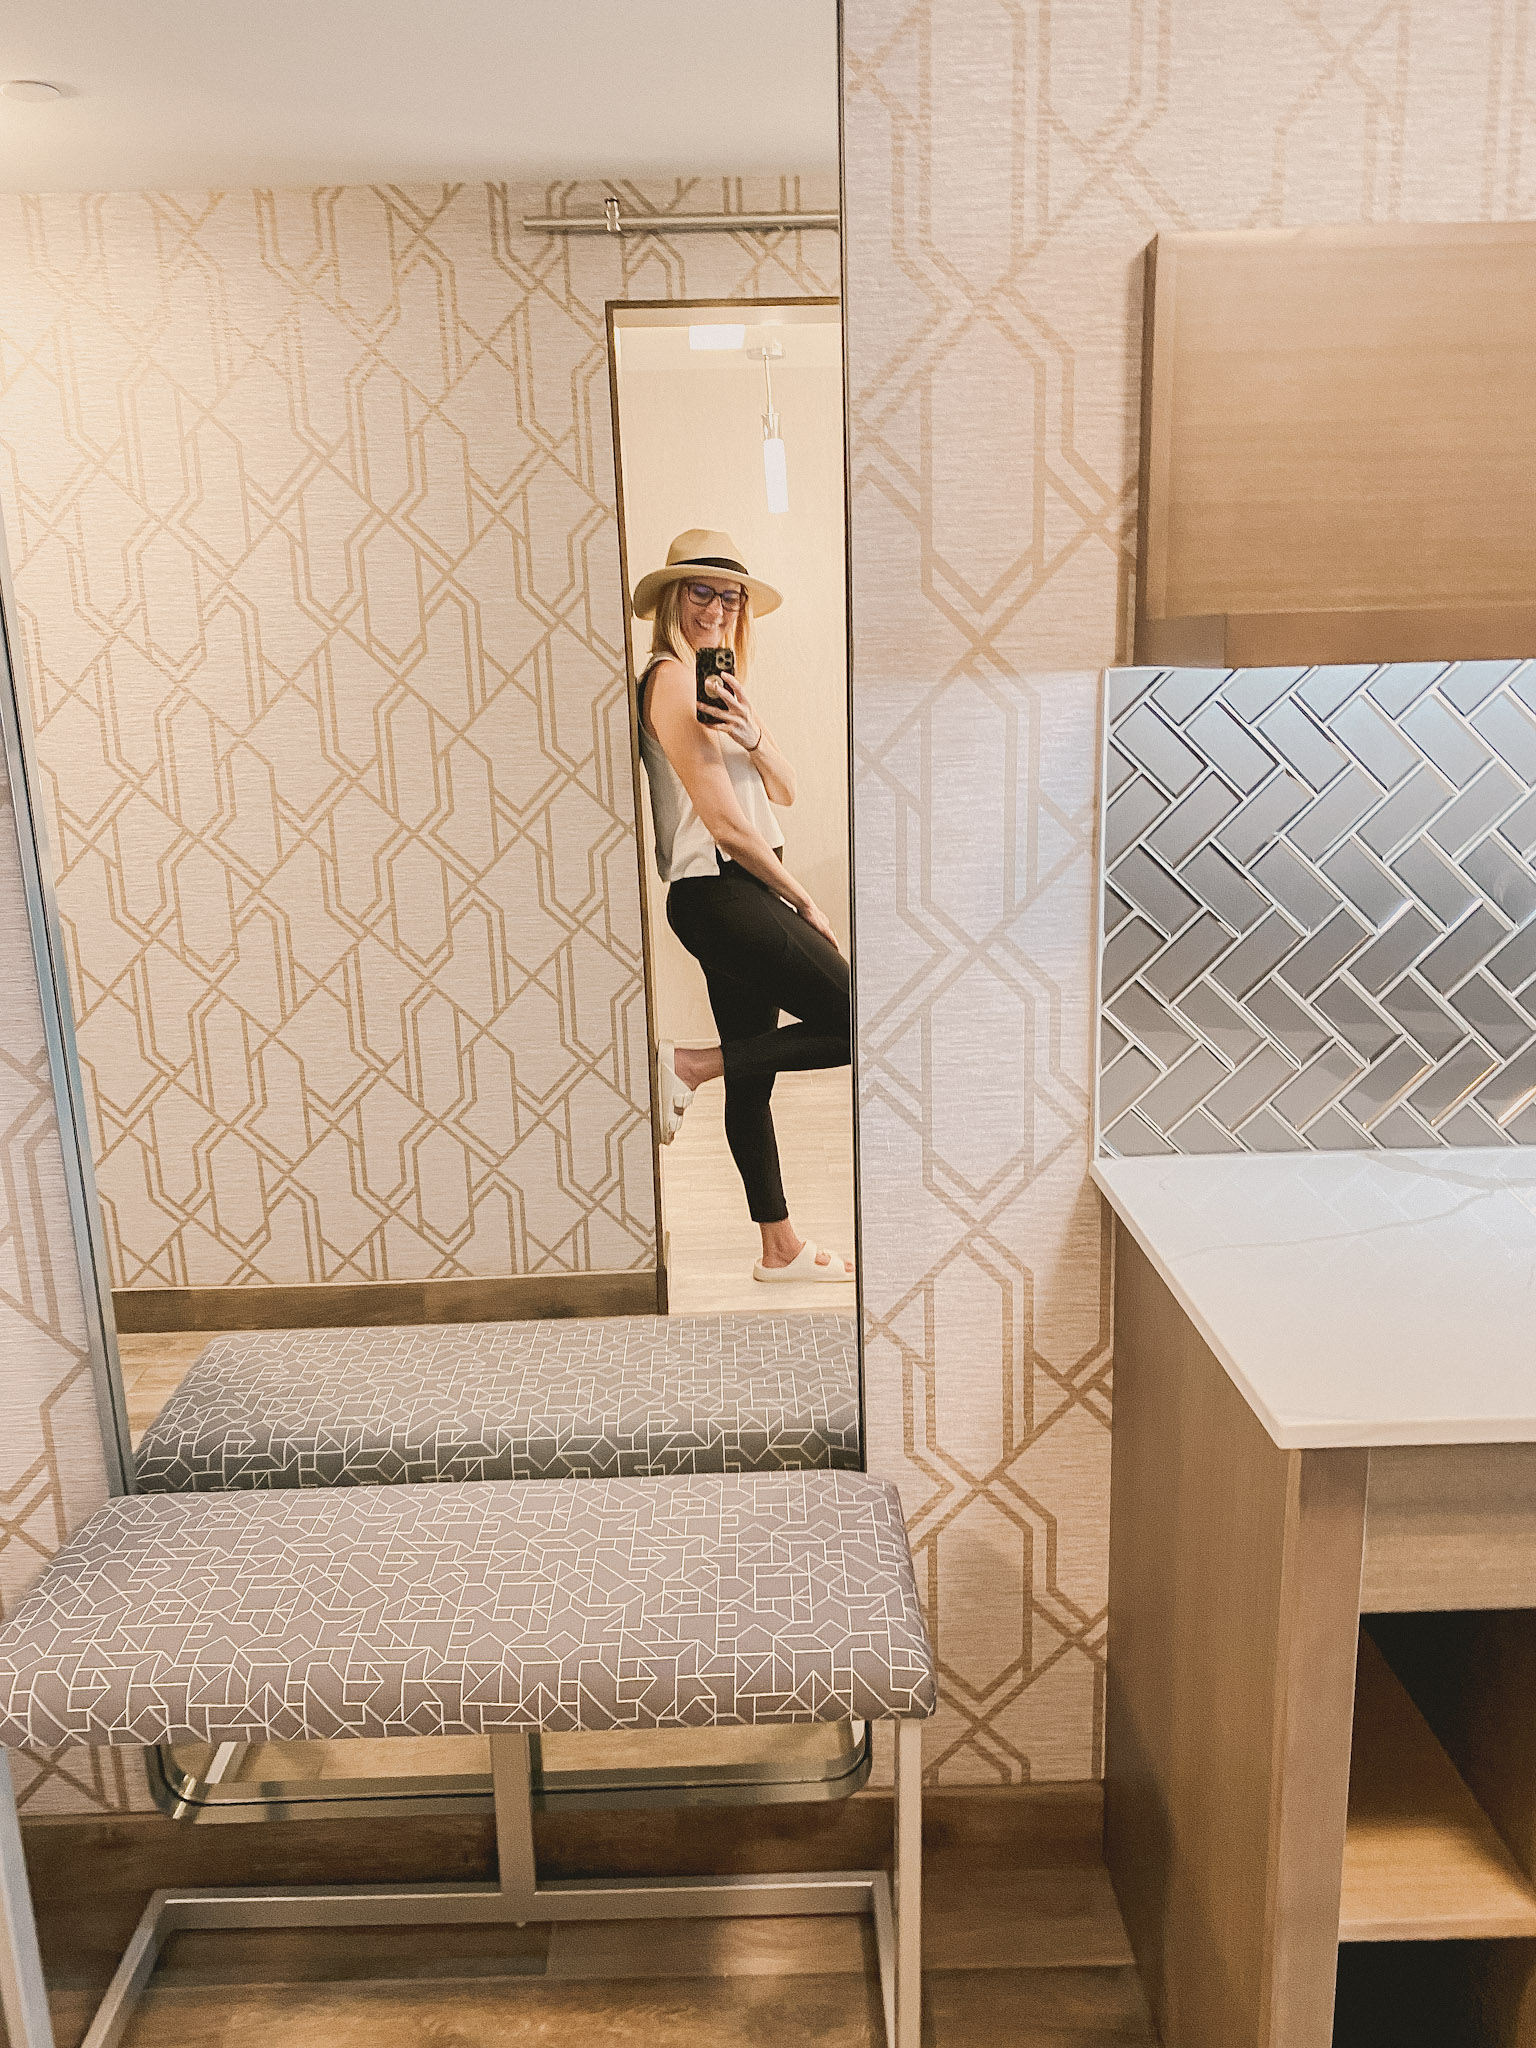 selfie in the mirror of a hotel